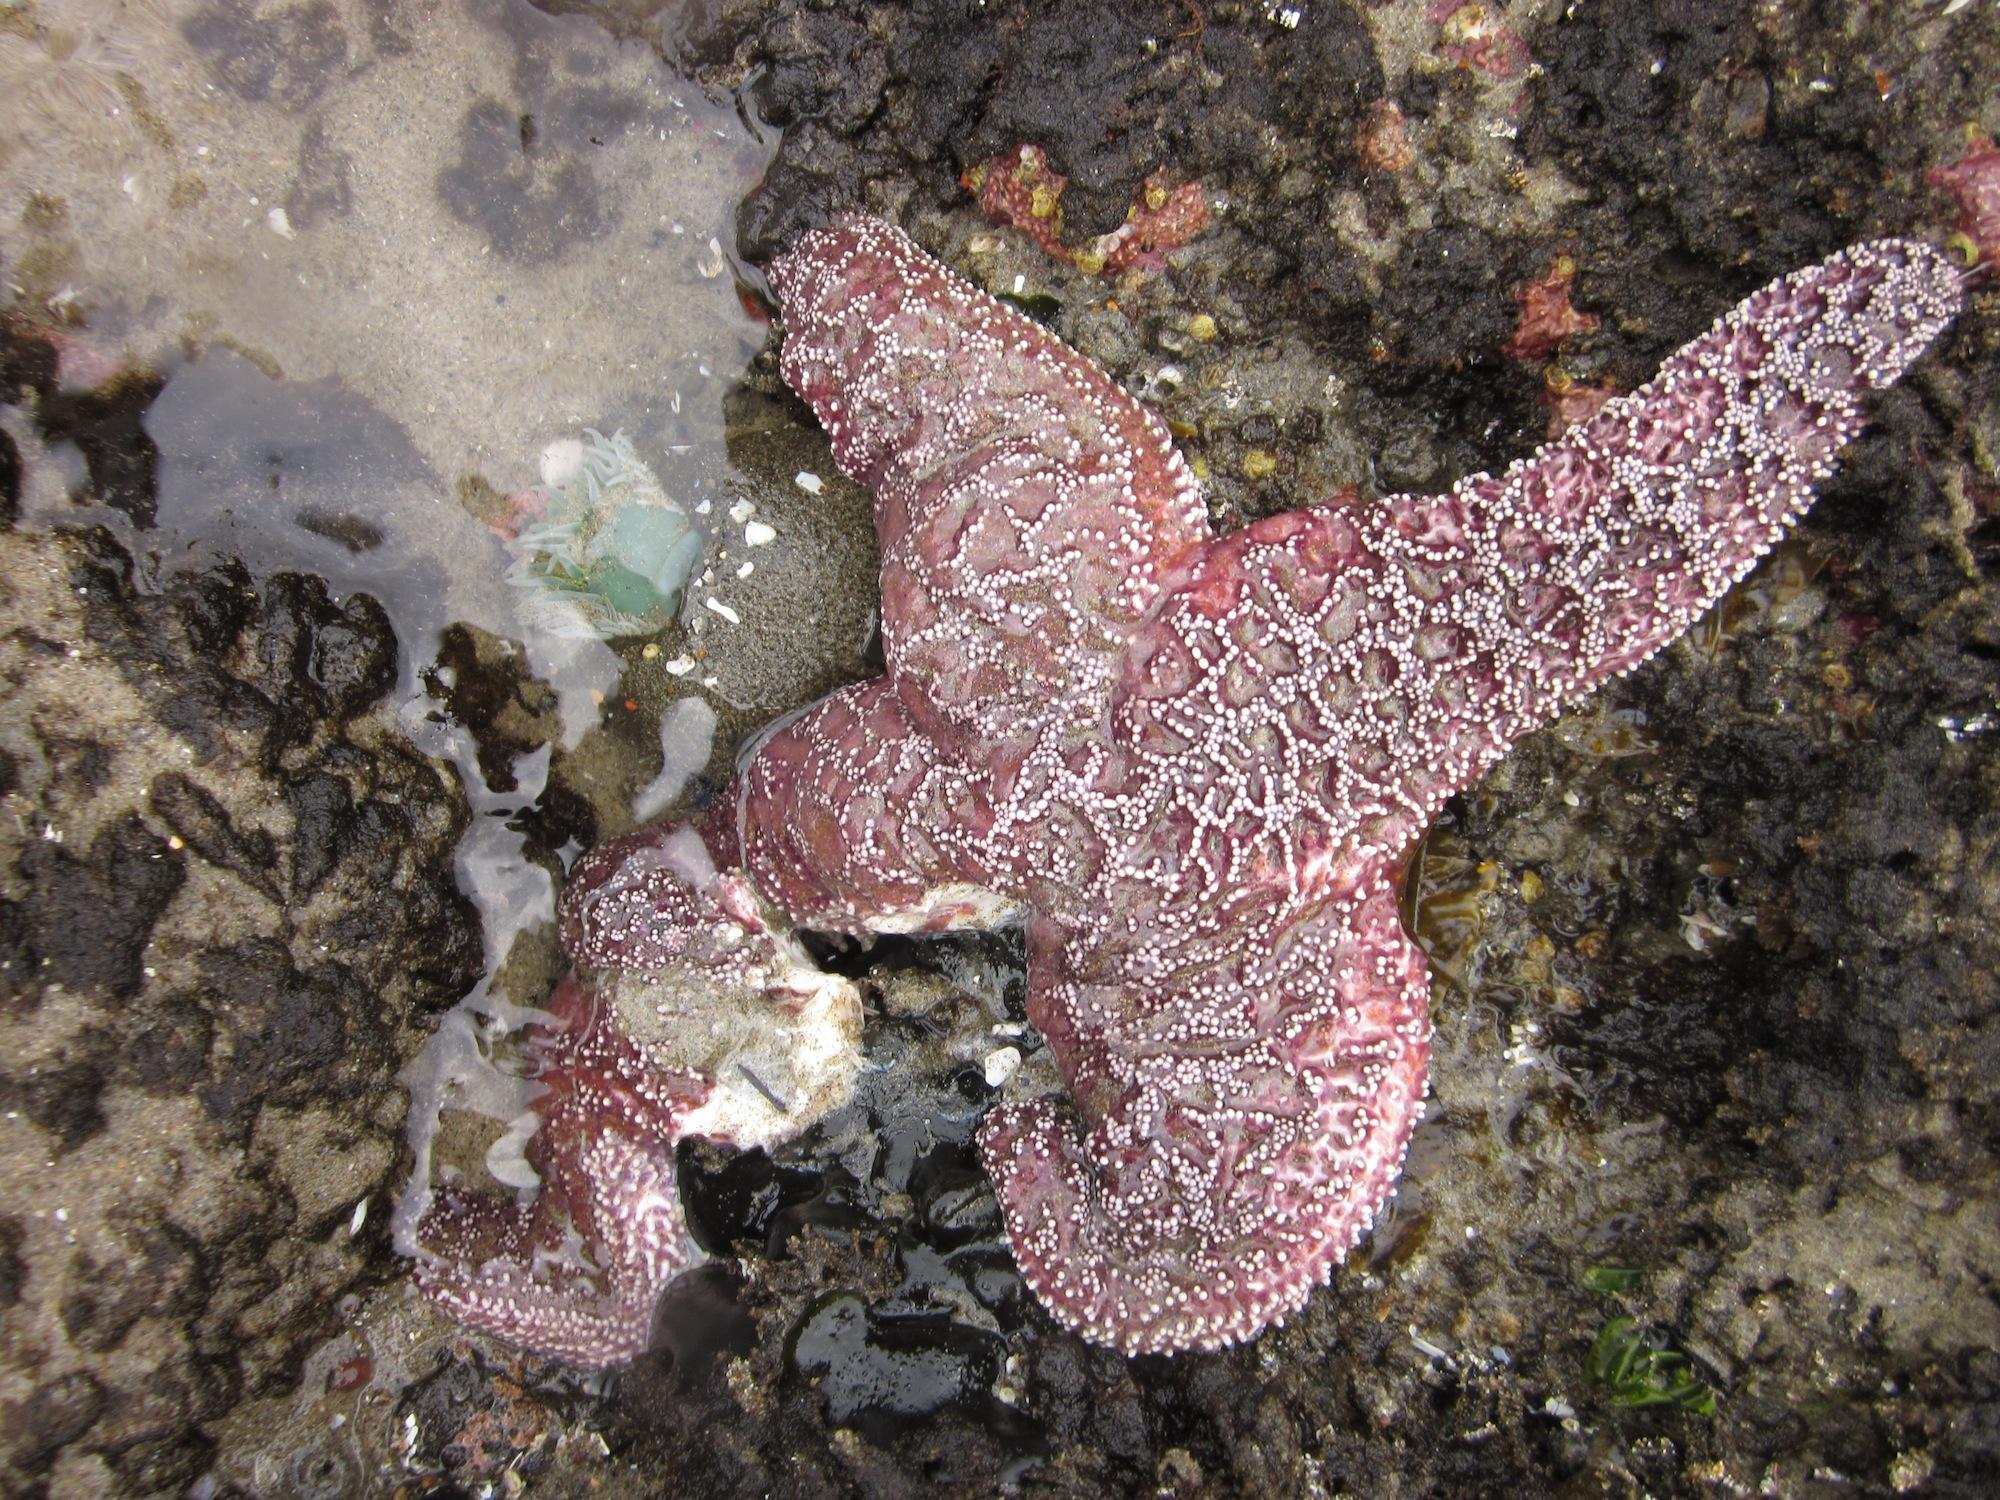 Oregon researchers develop new treatment for endangered sea stars